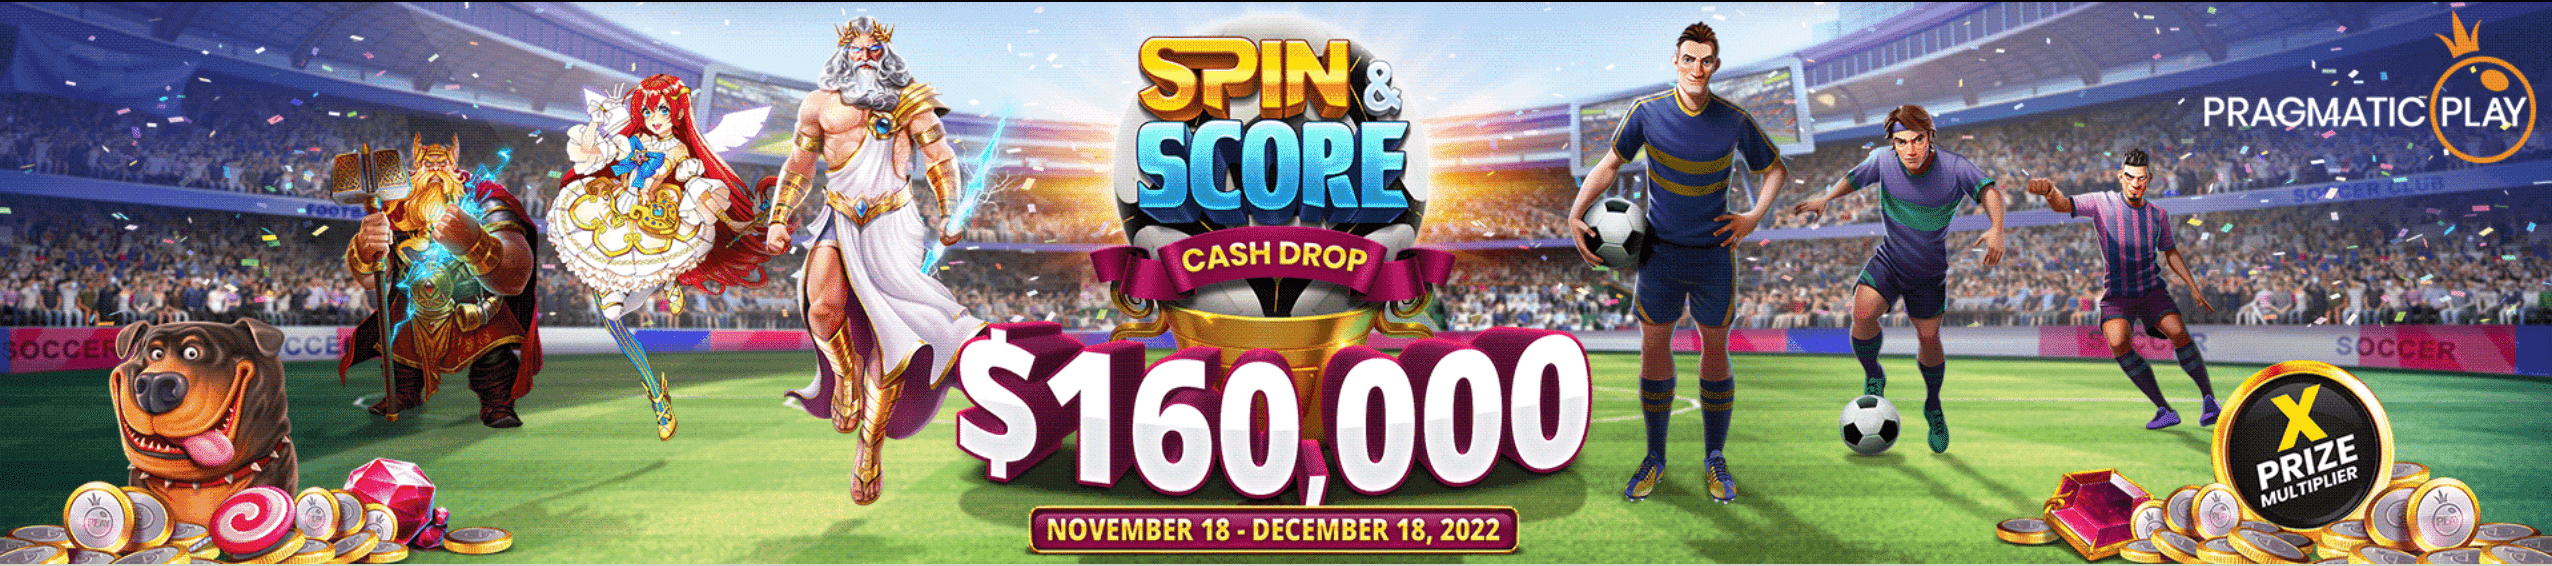 Spin & Score Cashdrop Promotion 2022 by Megaway